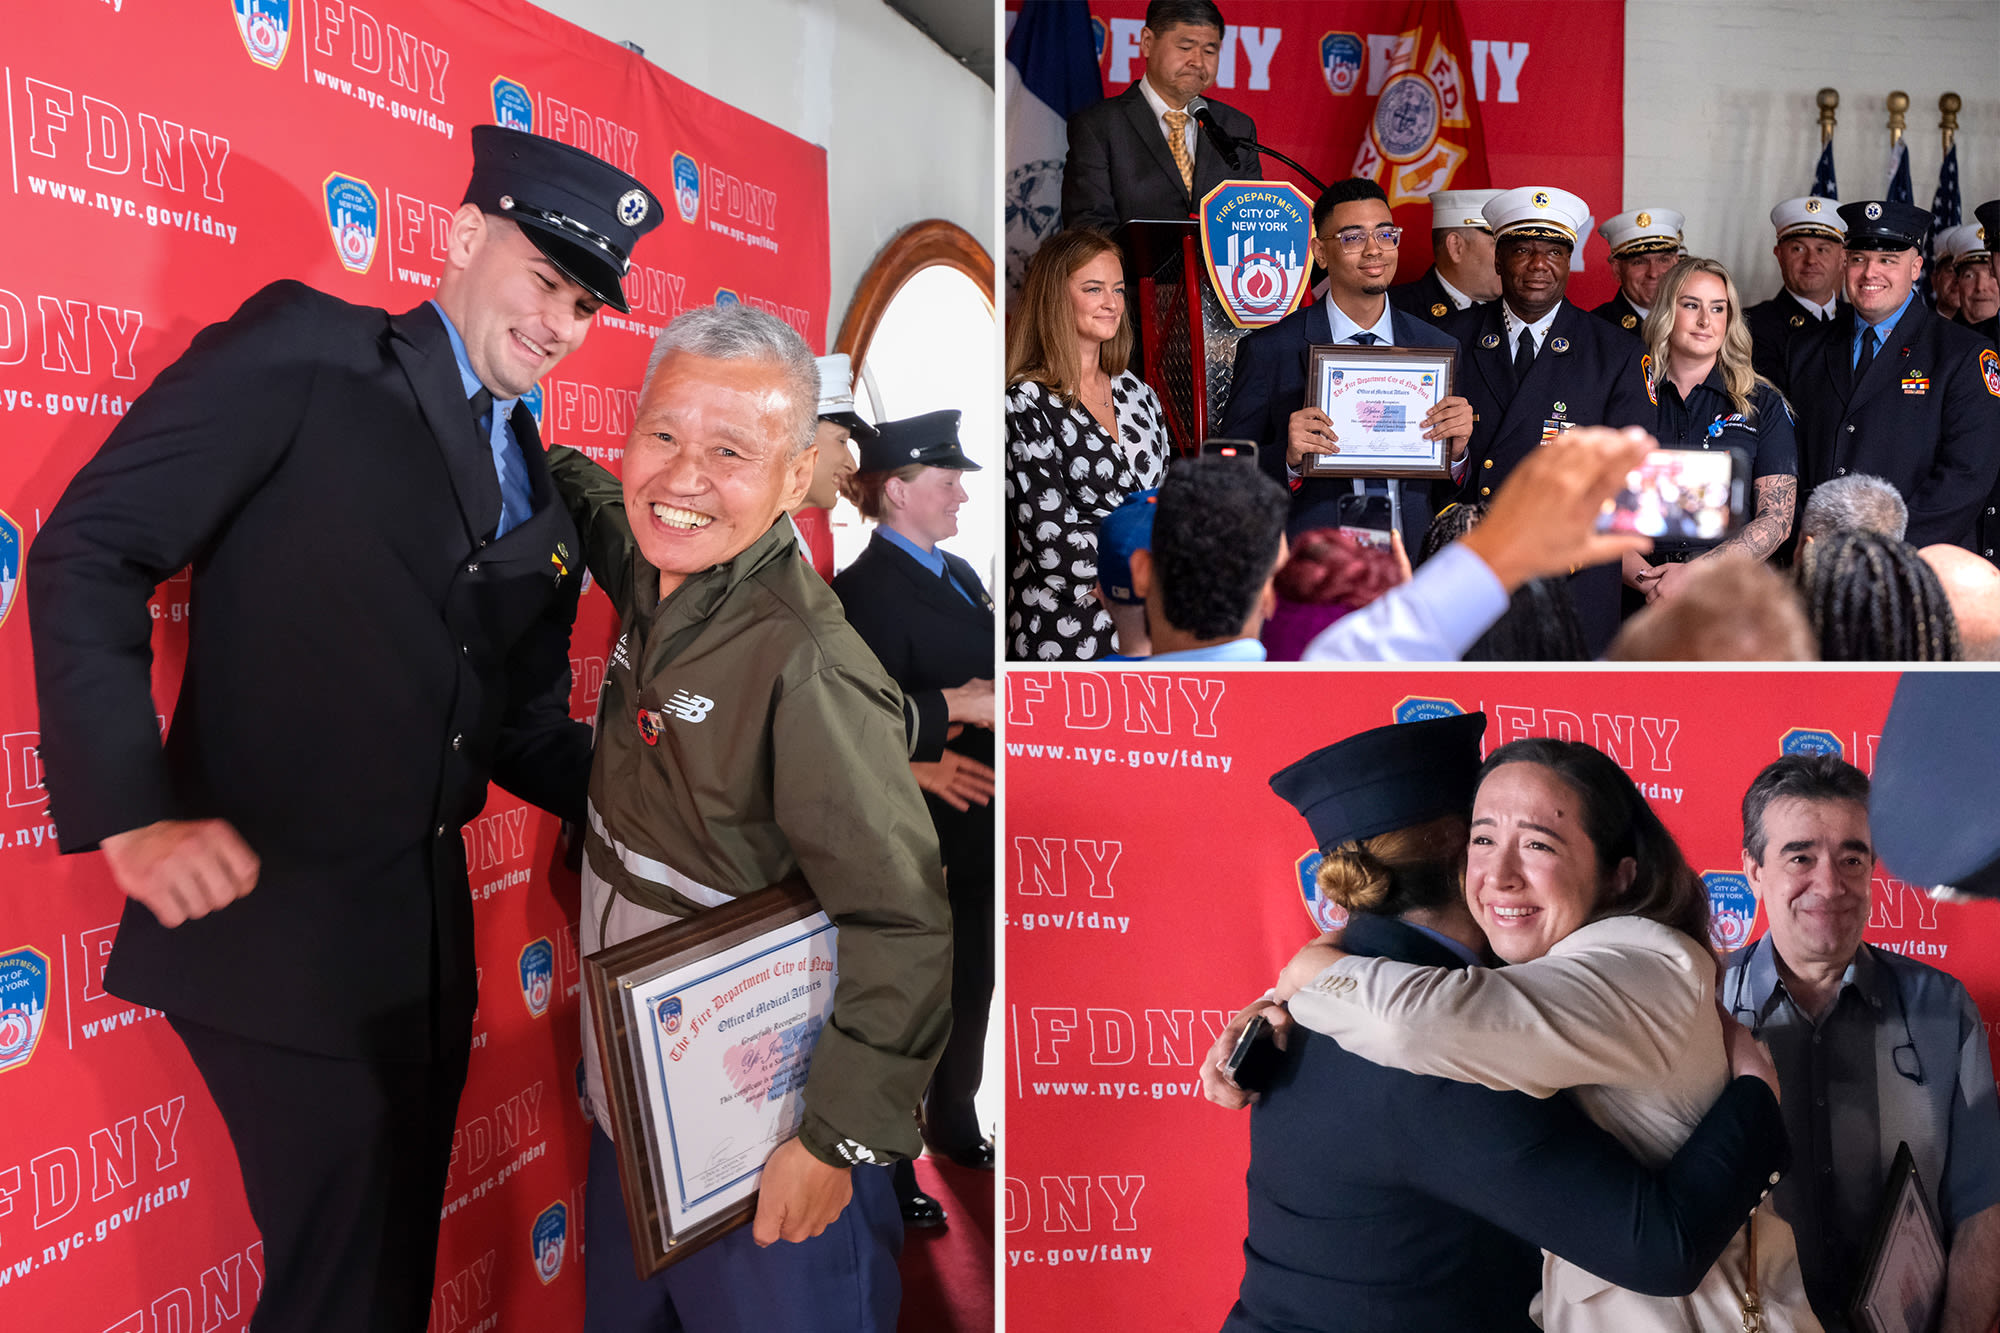 Cardiac arrest survivors reunited with first responders who saved them in tear-jerking FDNY ceremony